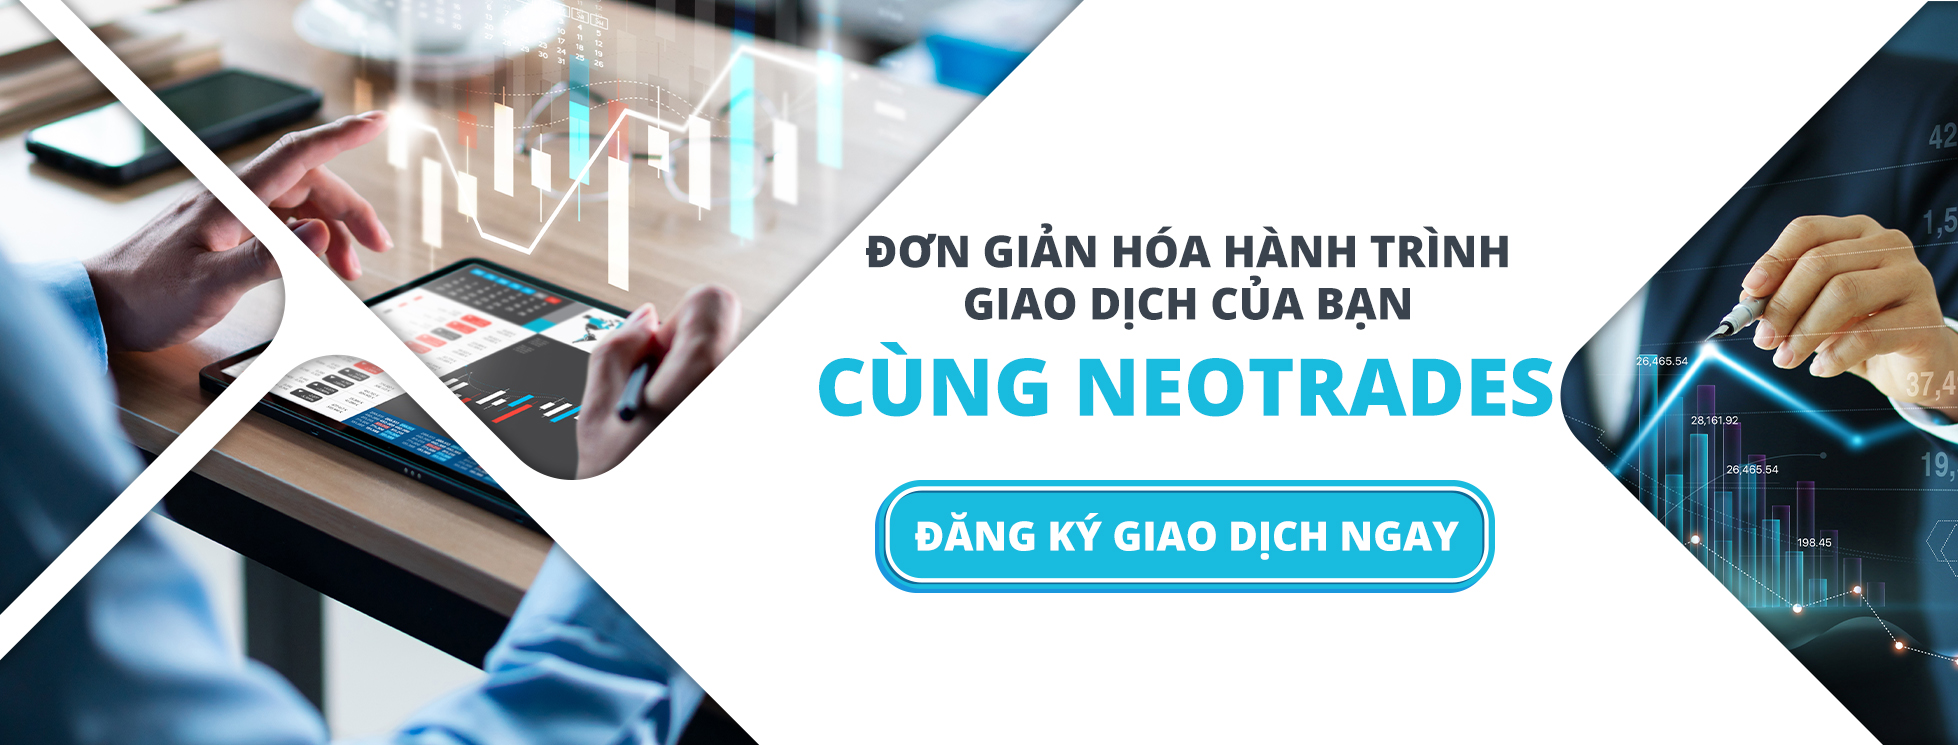 san-giao-dịch-neotrades